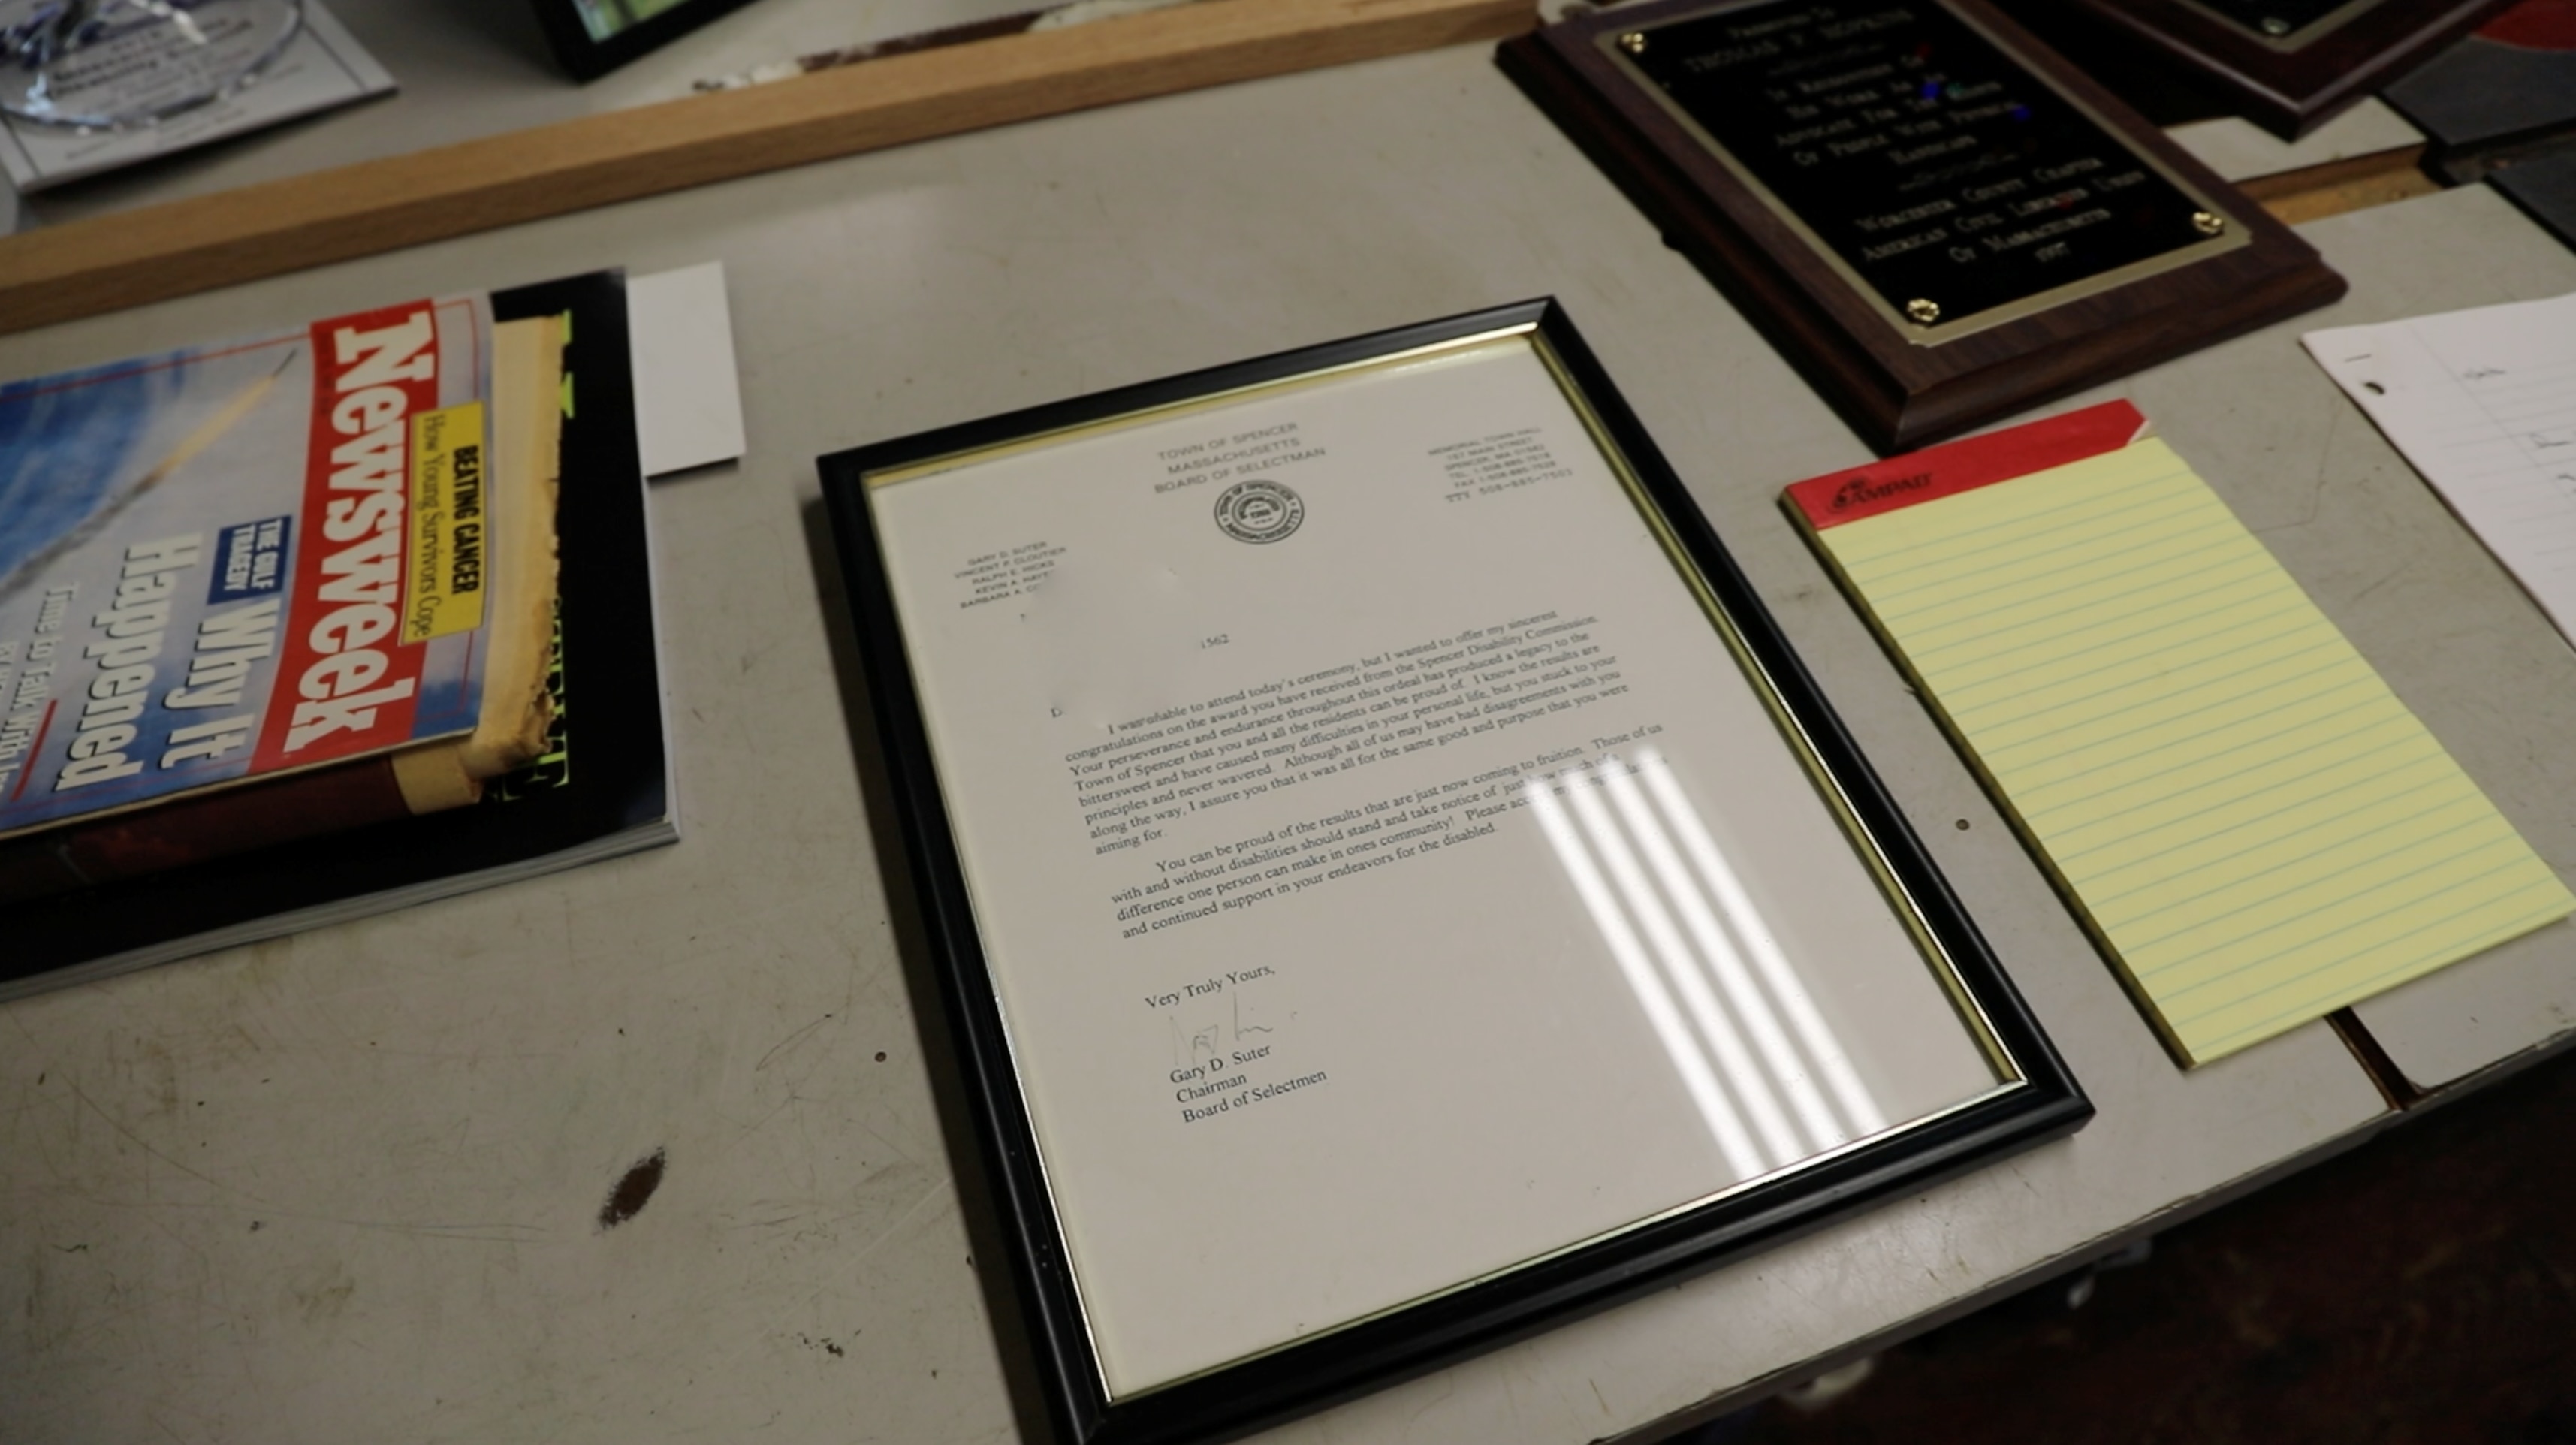 A letter of congratulations to Tom for an award he received. The letter is signed by Gary Suter, Chairman of the Board of Selectman